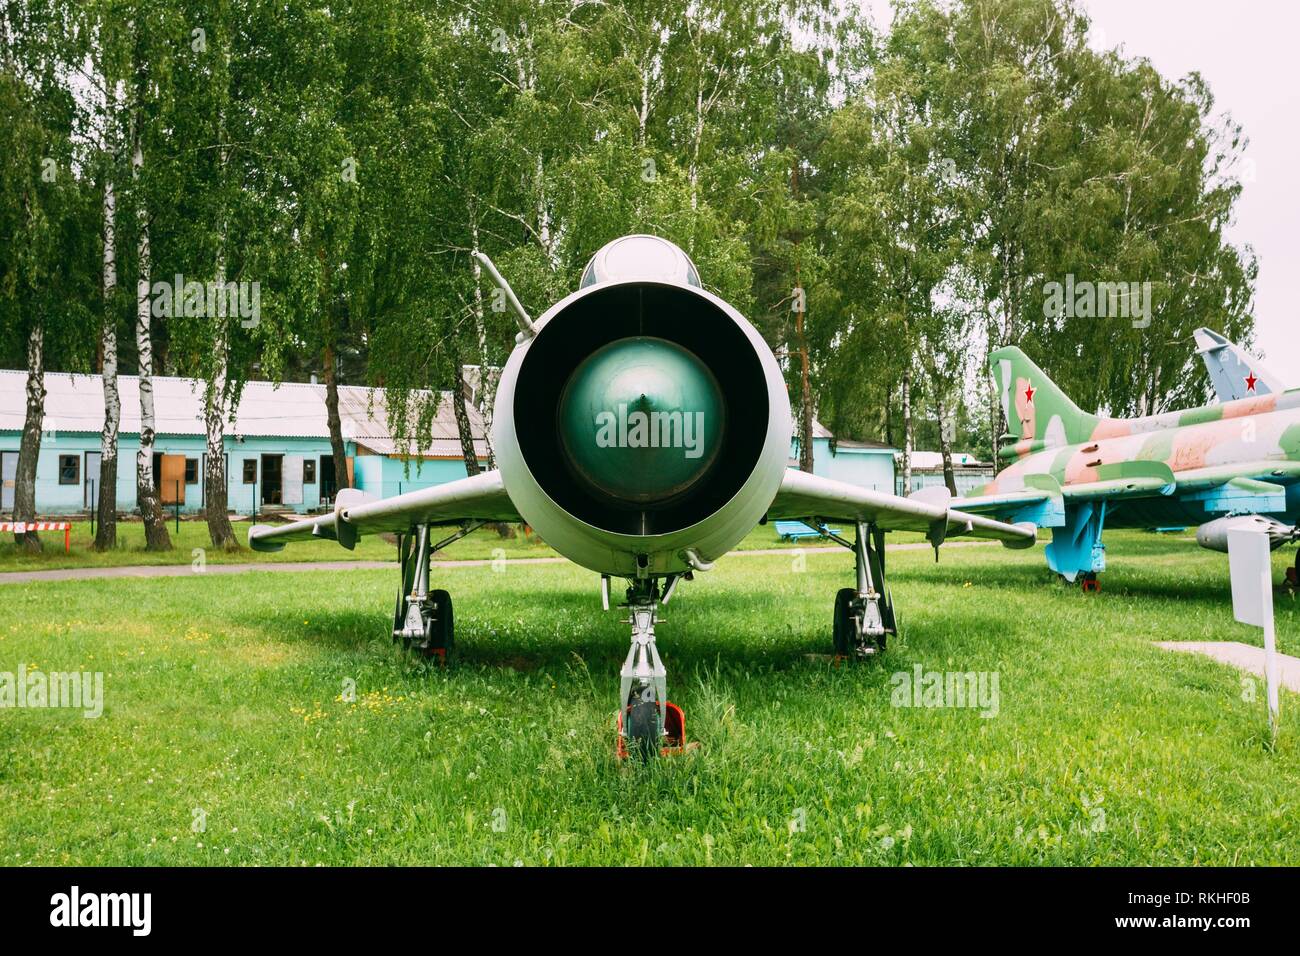 Old Russian Soviet Supersonic Military Plane Aircraft Fighter-bomber Stands At Aerodrome. Stock Photo